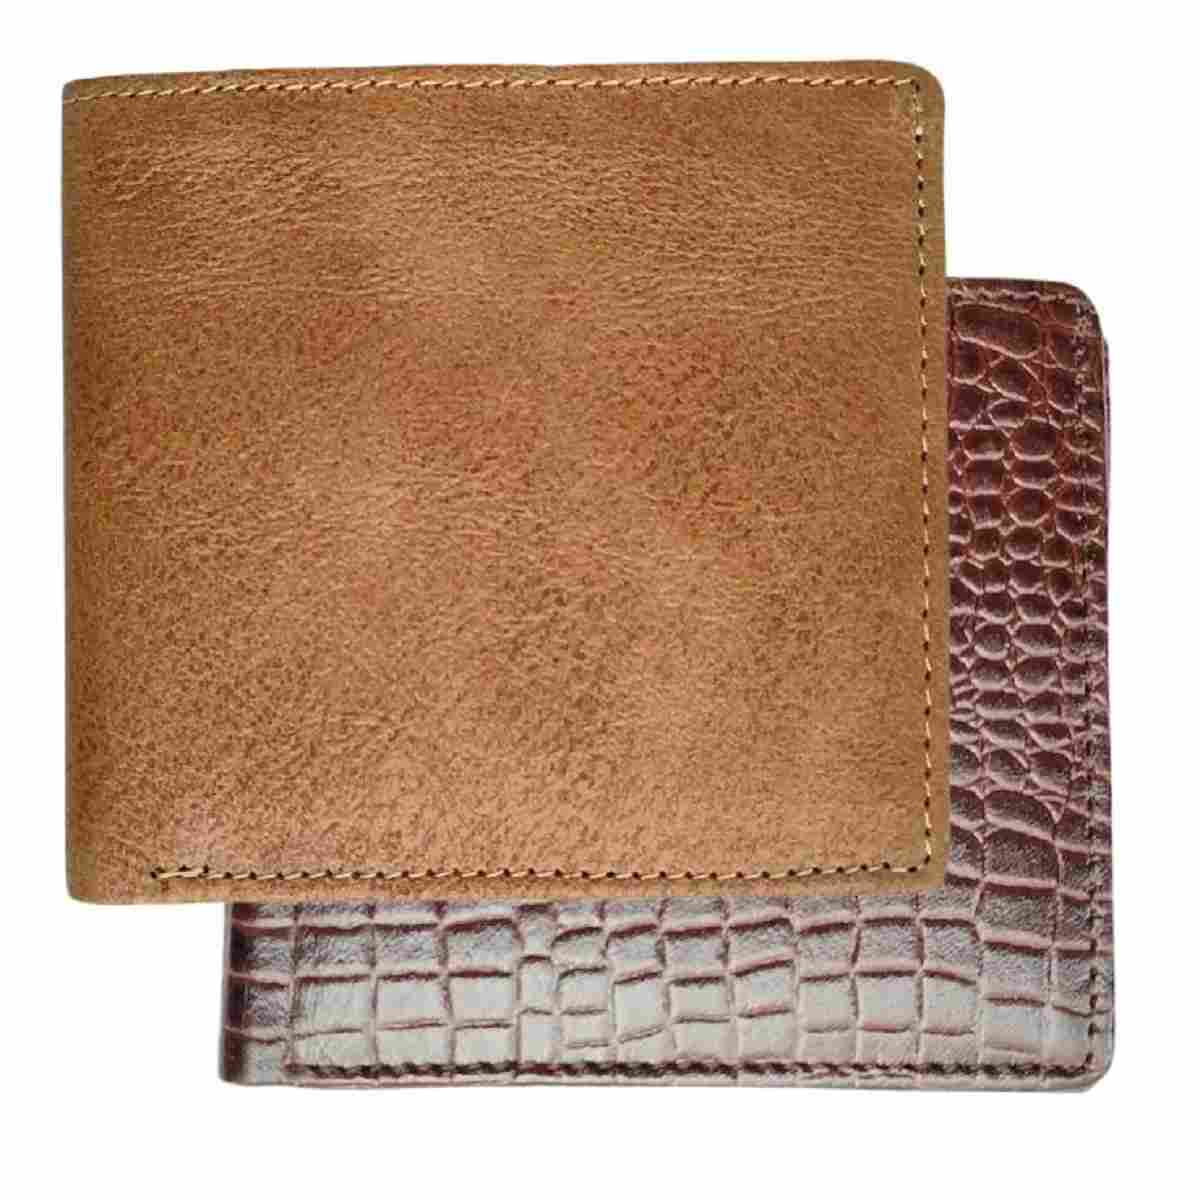 E2018 Genuine Leather Wallets for Men Pack of 2